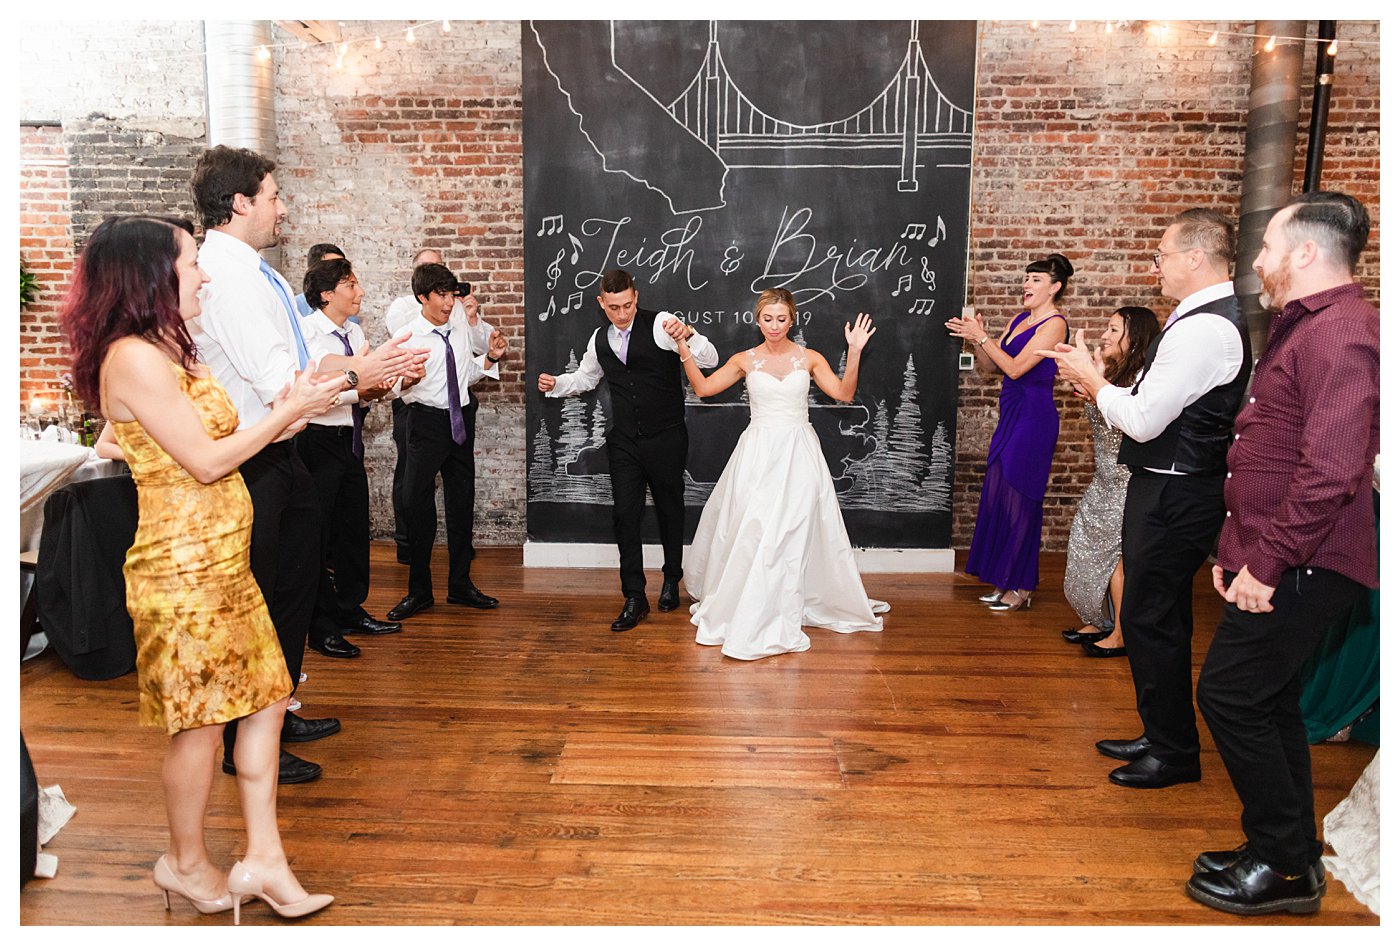 Reception Dancing a the Stockroom in Downtown Raleigh